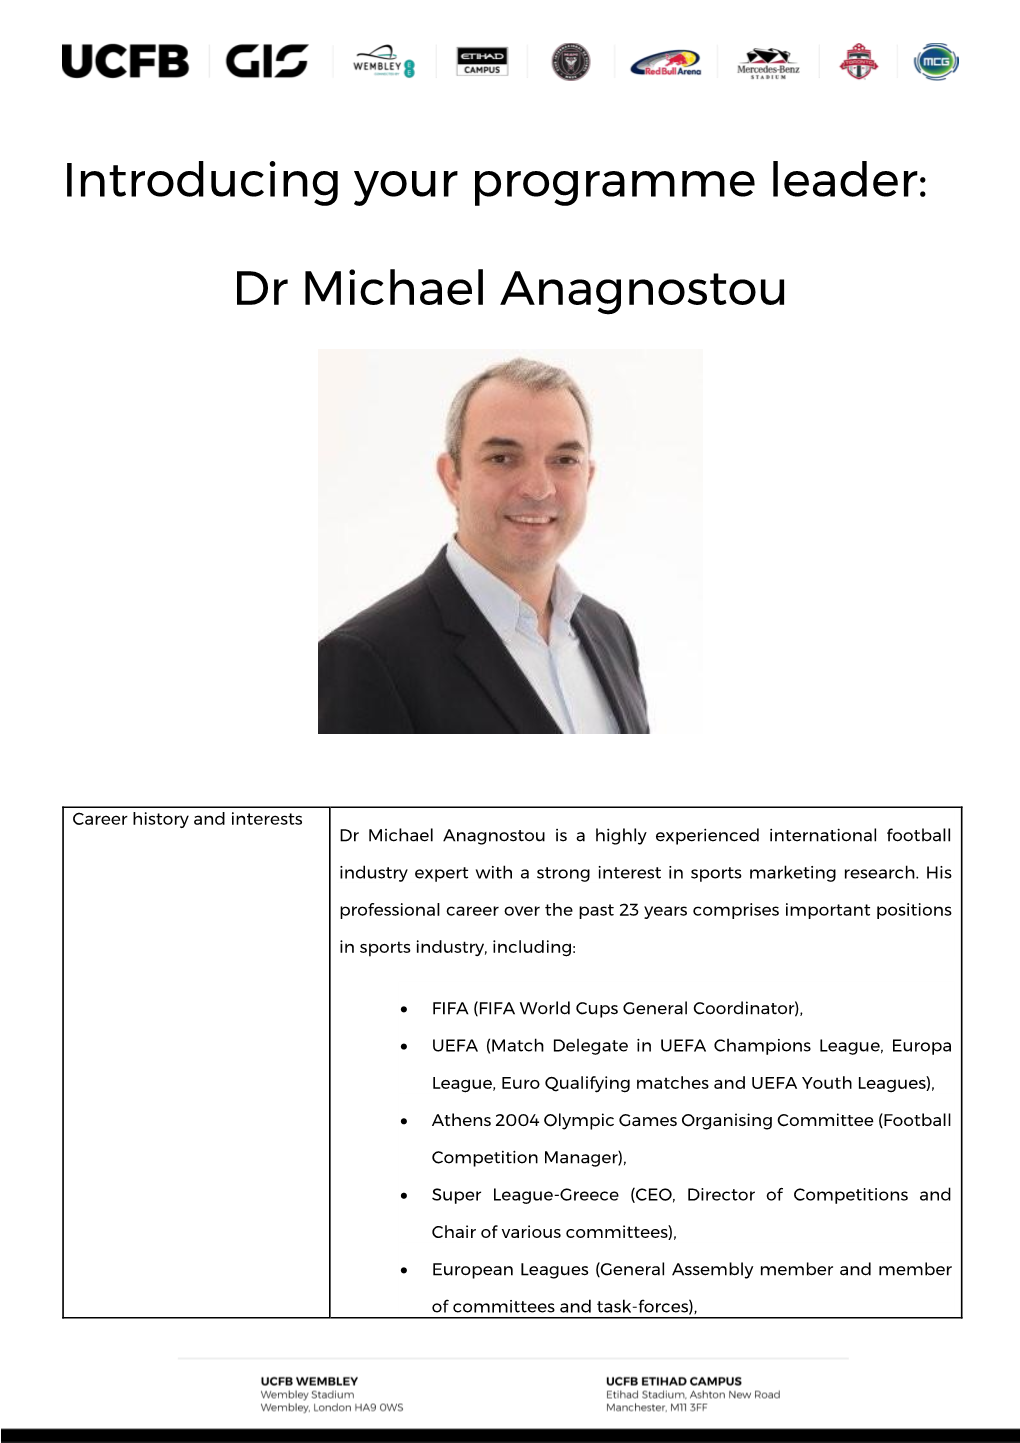 Introducing Your Programme Leader: Dr Michael Anagnostou